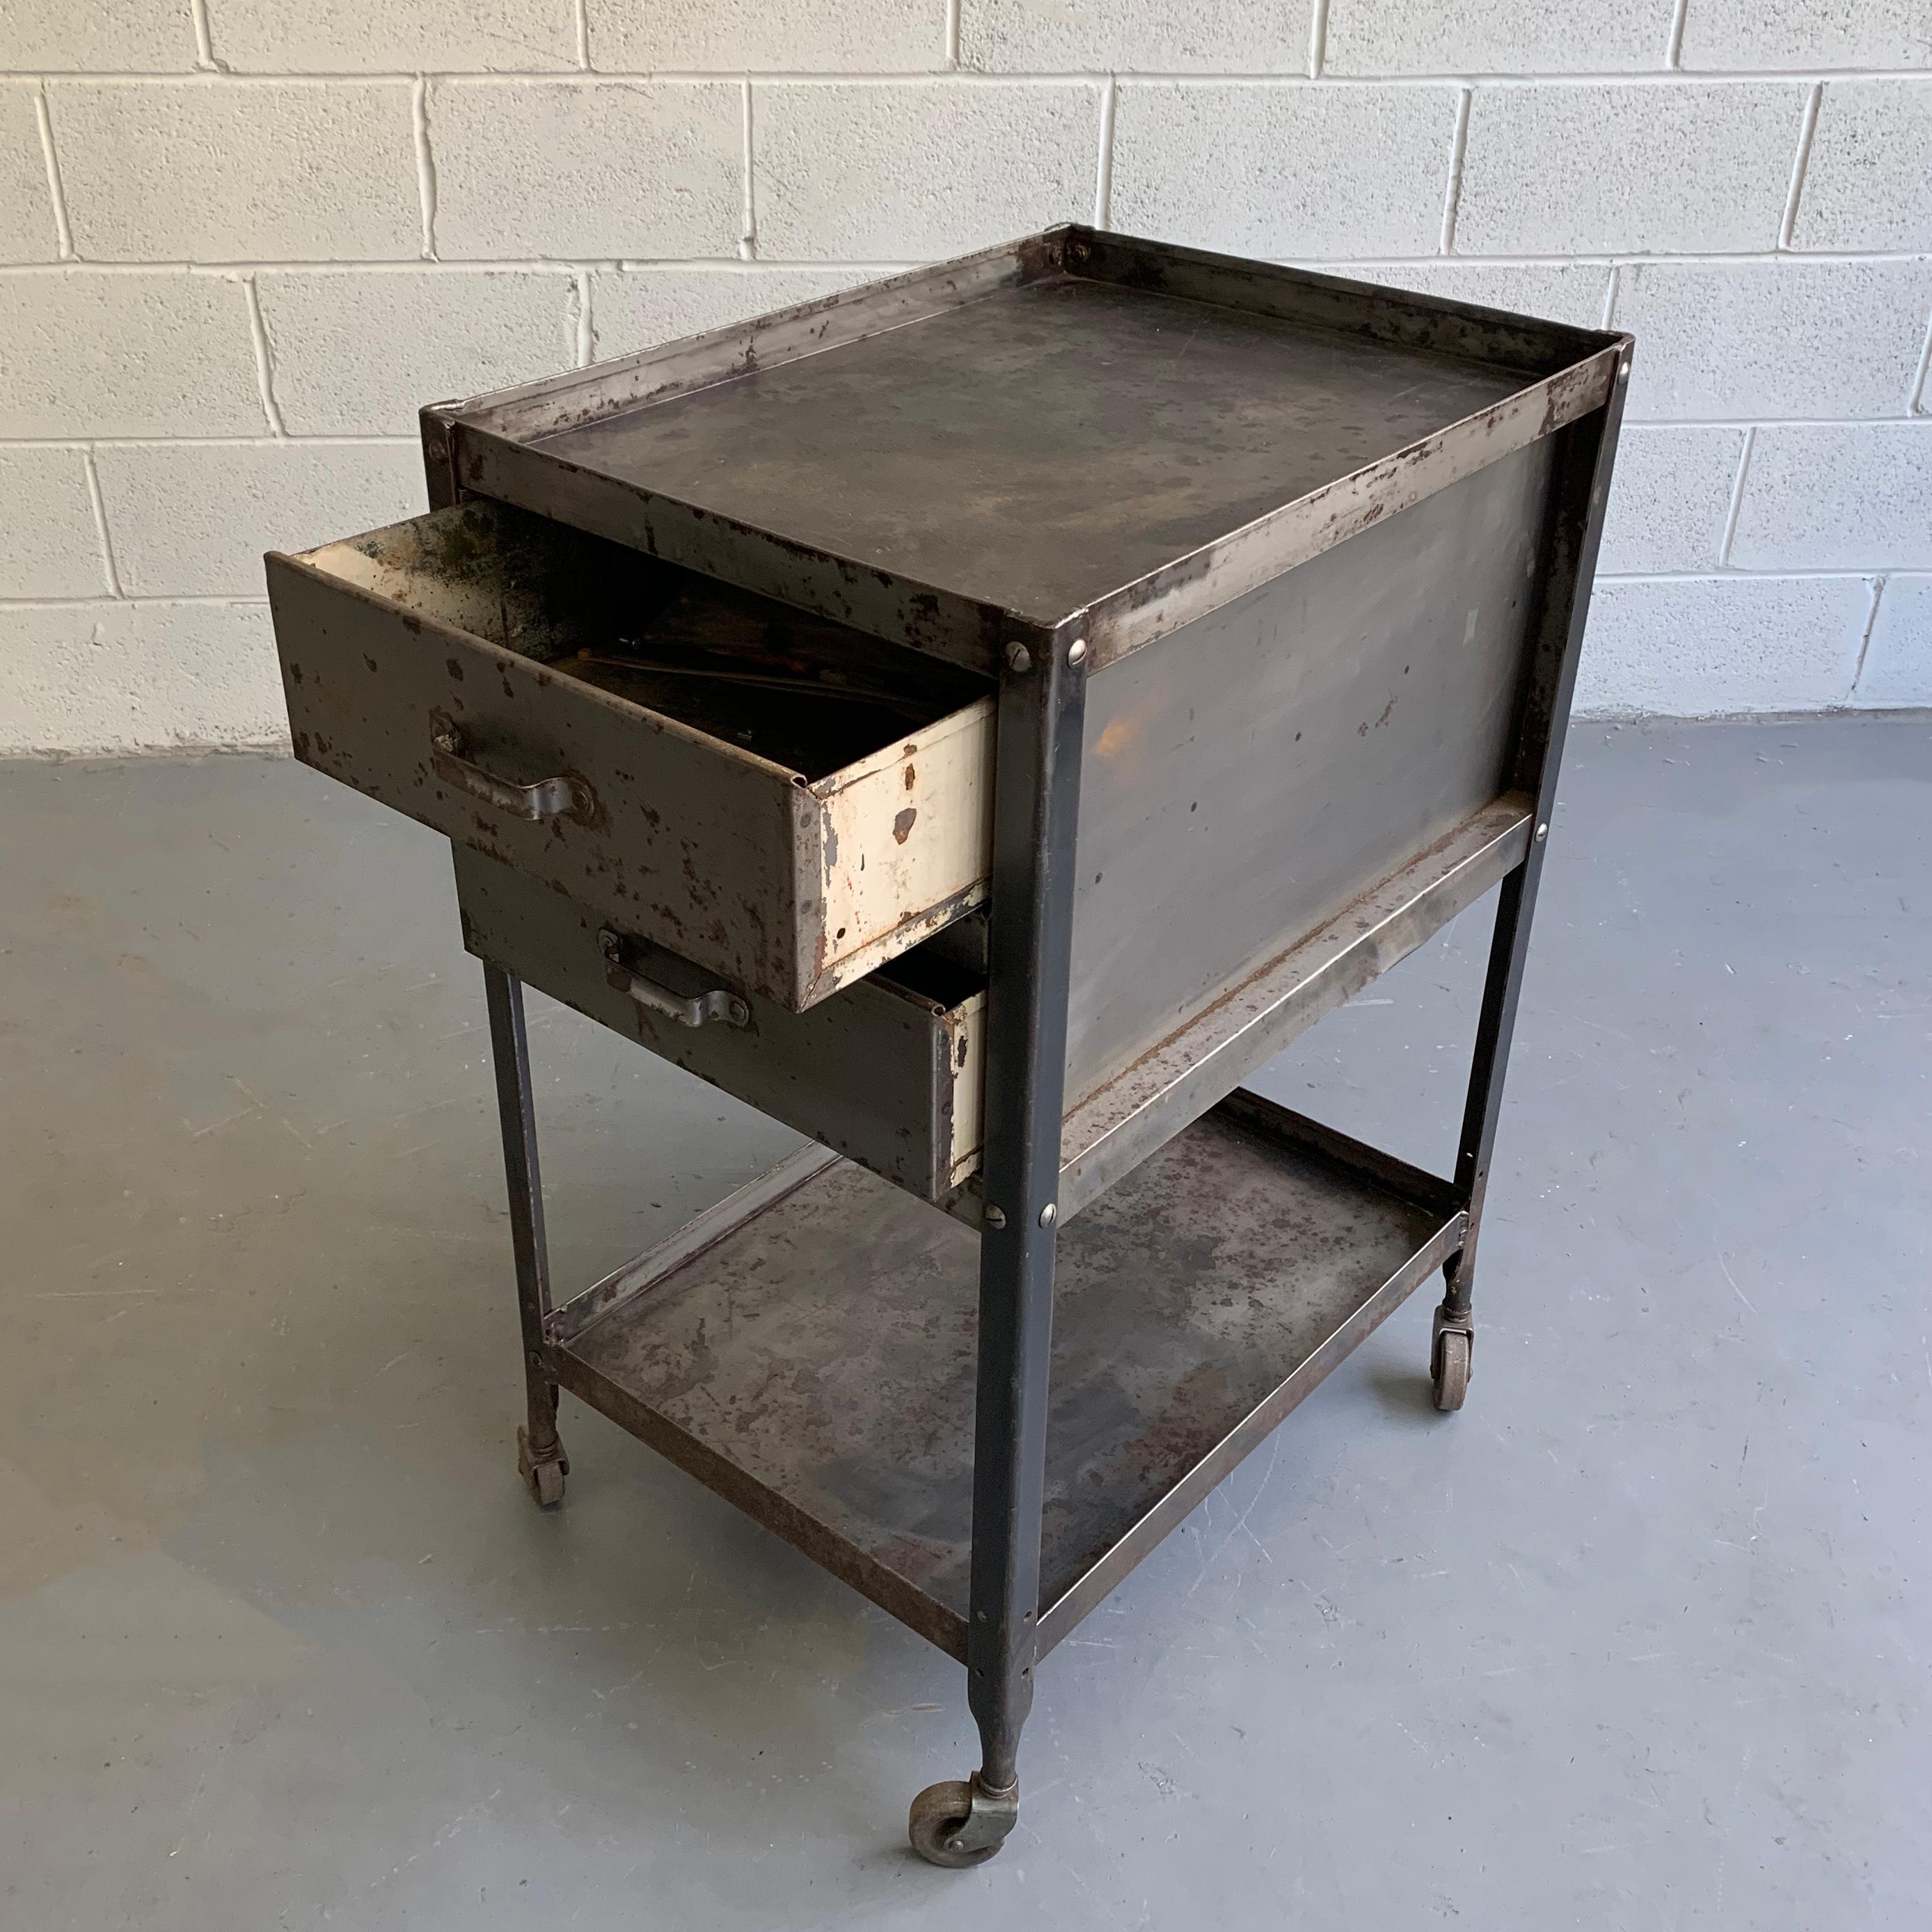 20th Century Industrial Brushed Steel Tool Caddy